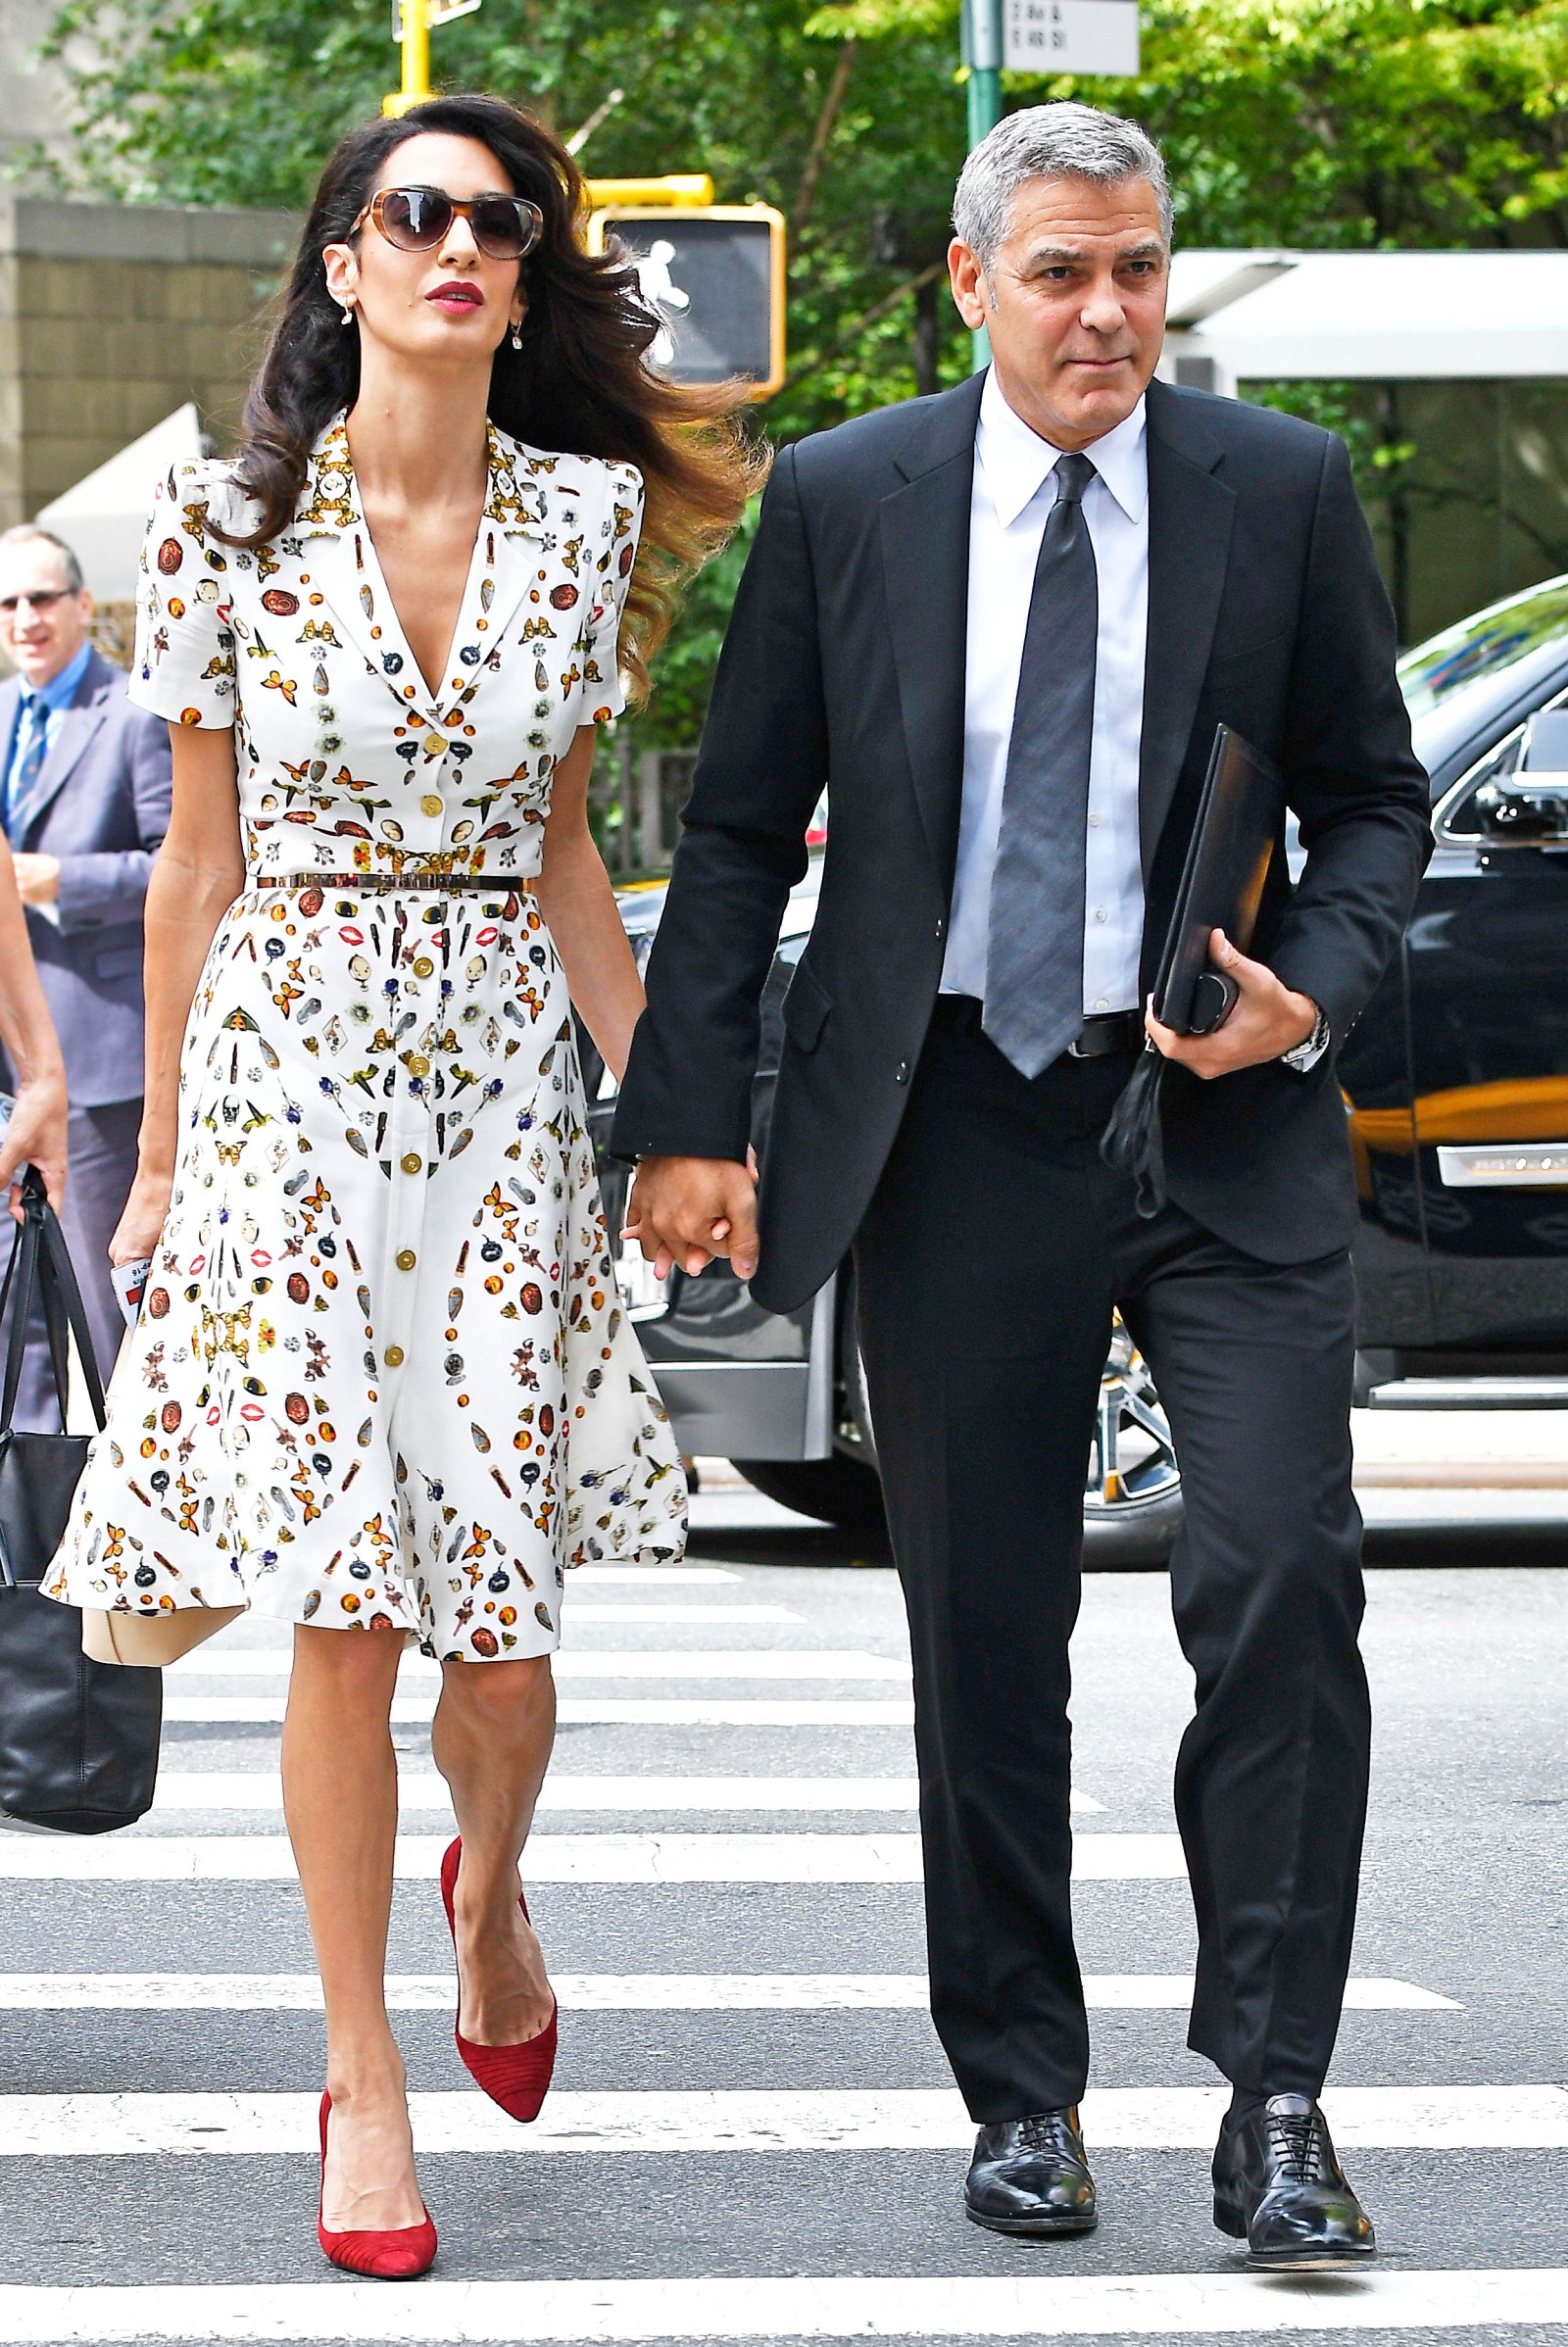 Amal Clooney Wears Whimsical ButtonDown Dress Street Style Photo